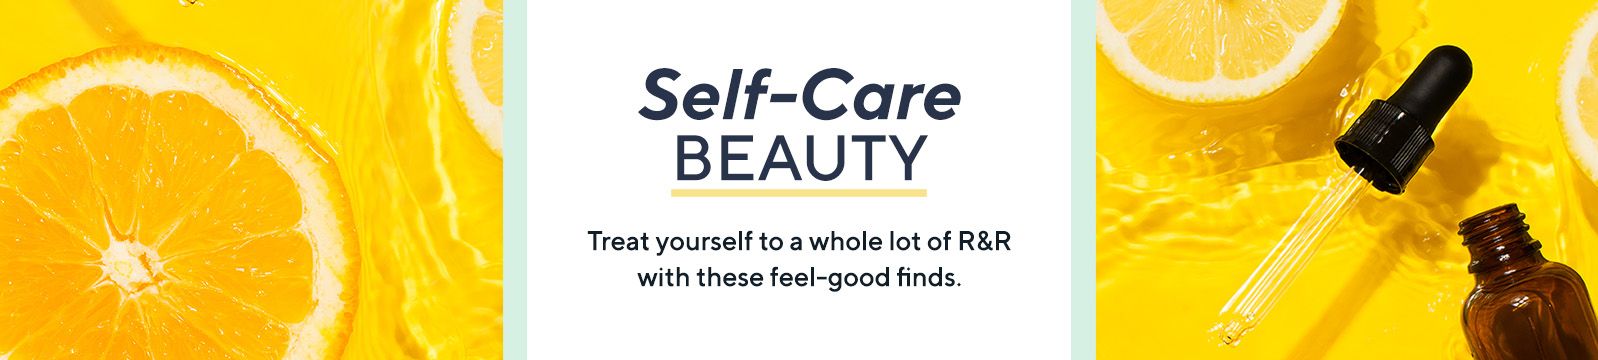 Self-Care Beauty - Treat yourself to a little R&R with these feel-good finds. 